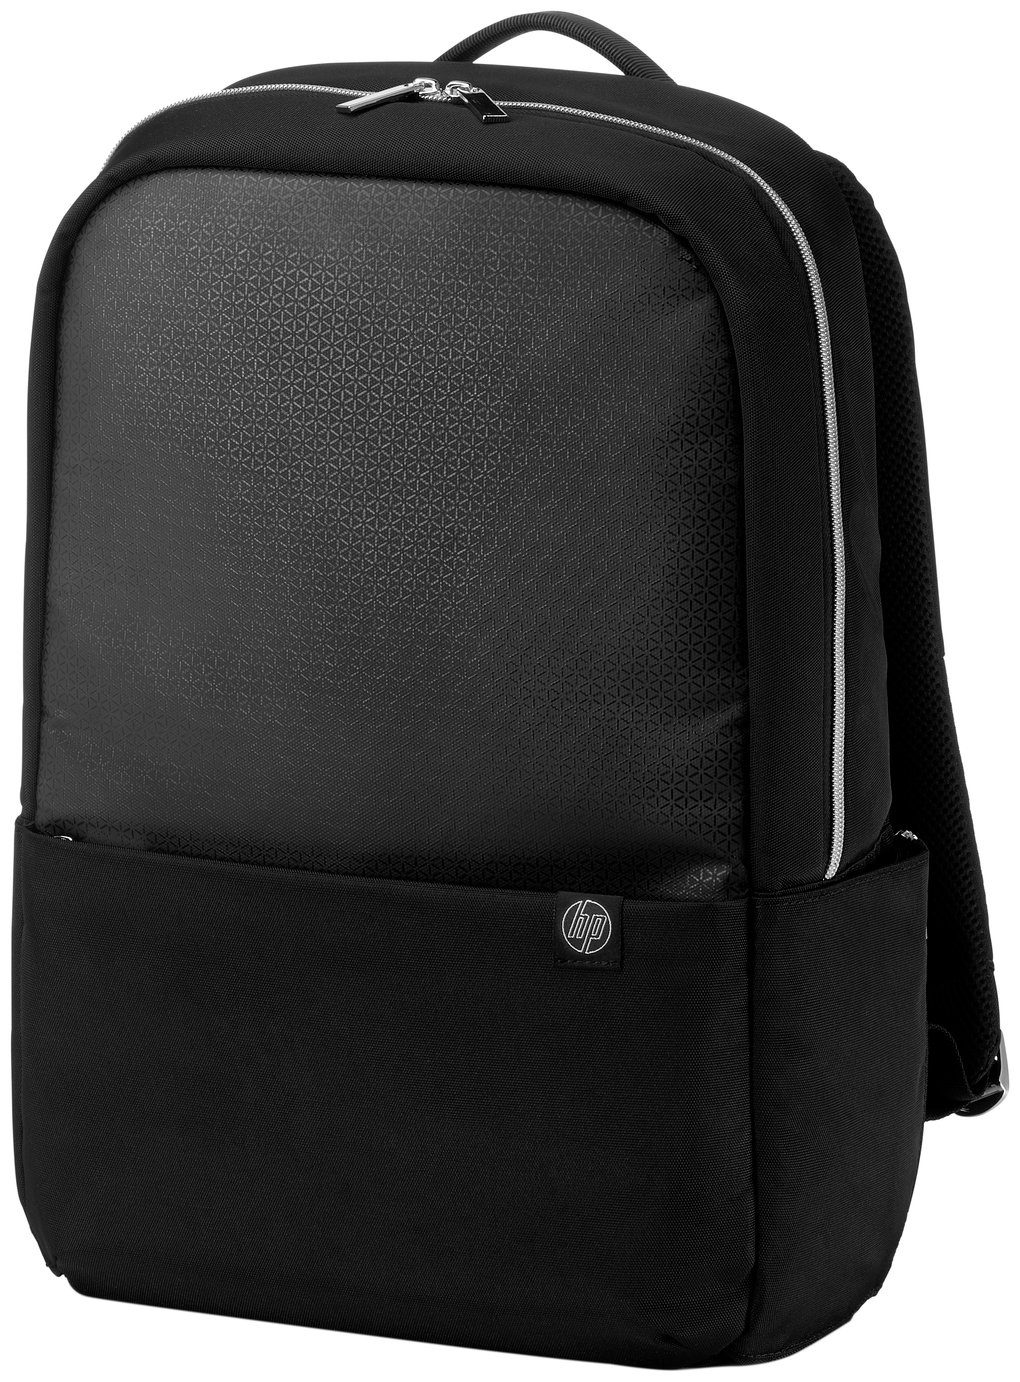 HP Duotone 15.6 Inch Laptop Backpack - Silver